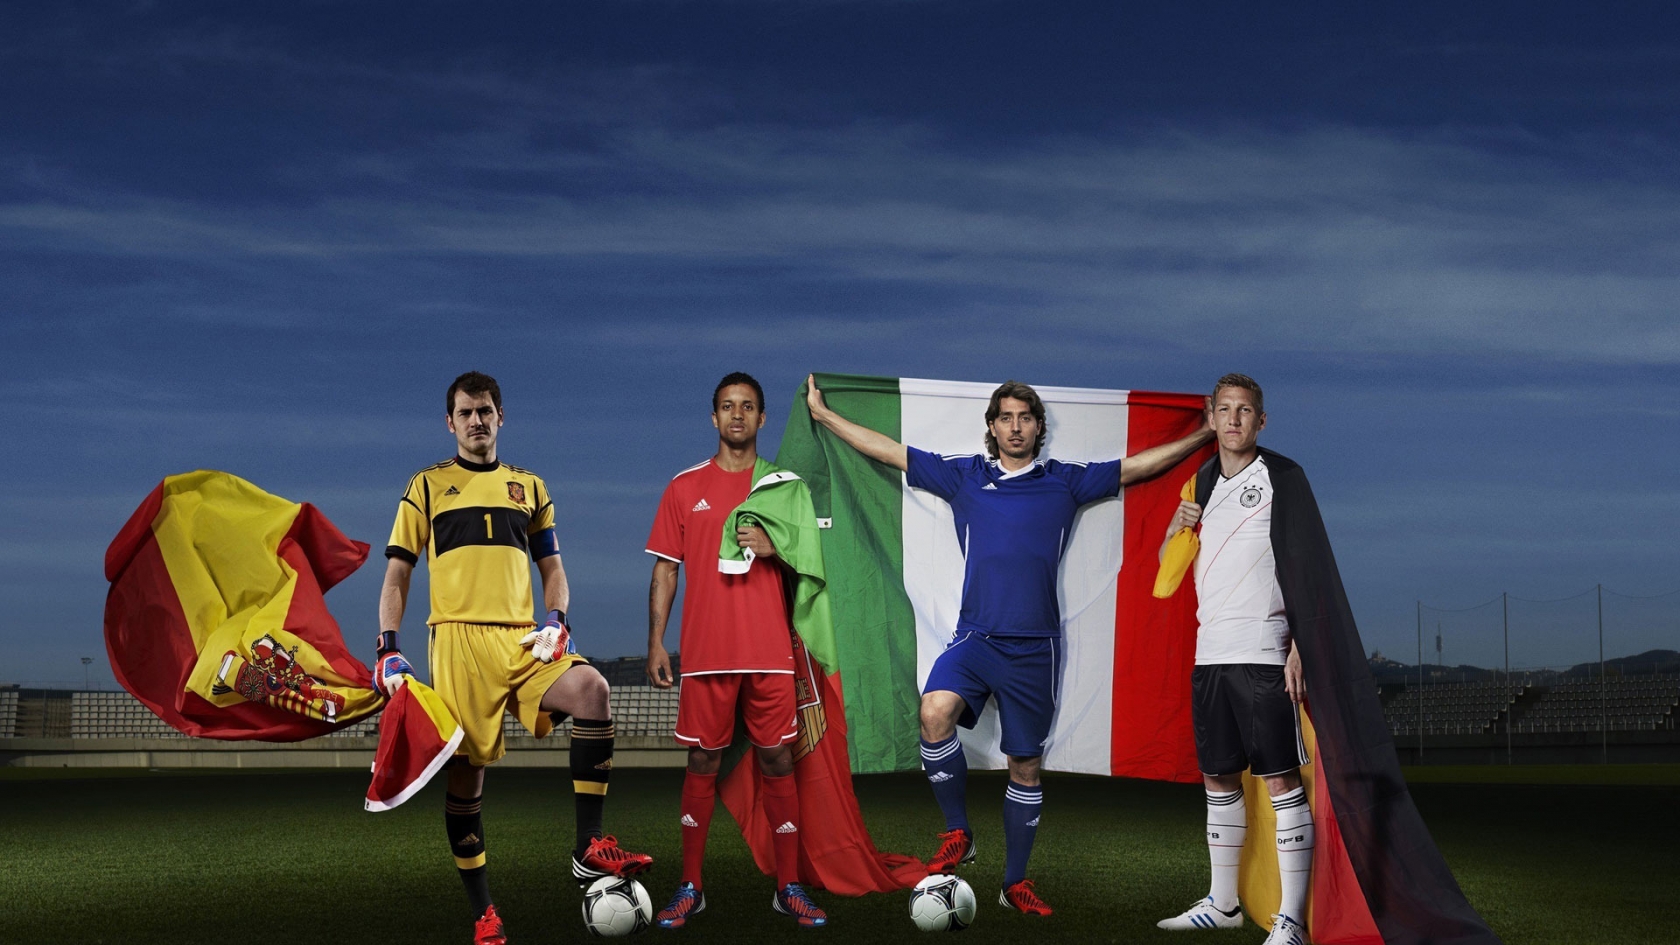 Spain Portugal Italy and Germany for 1680 x 945 HDTV resolution